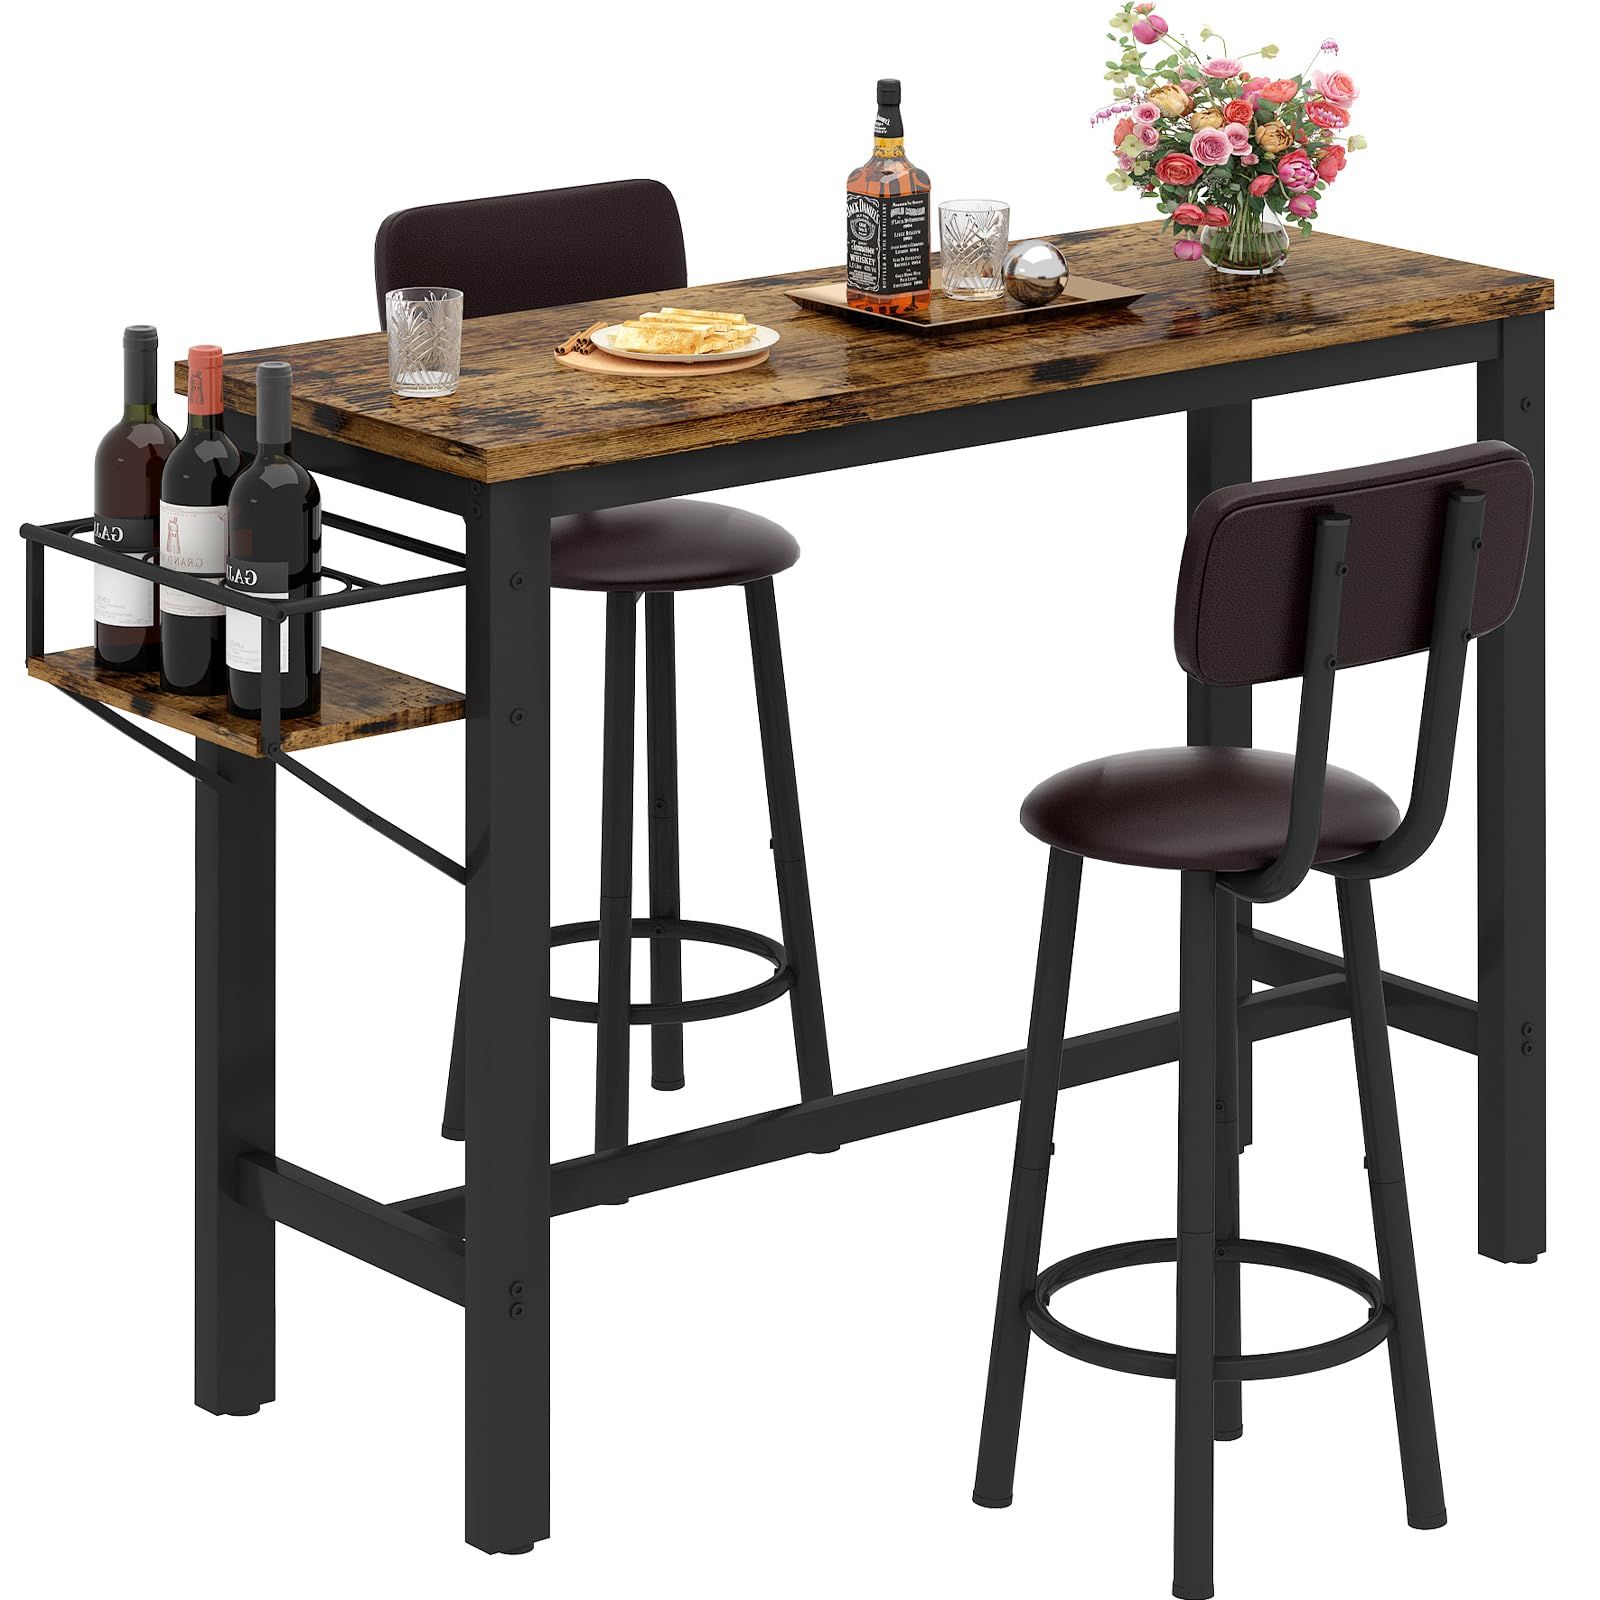 Upgrade Your Dining Space with a Stylish High Top Kitchen Table Set